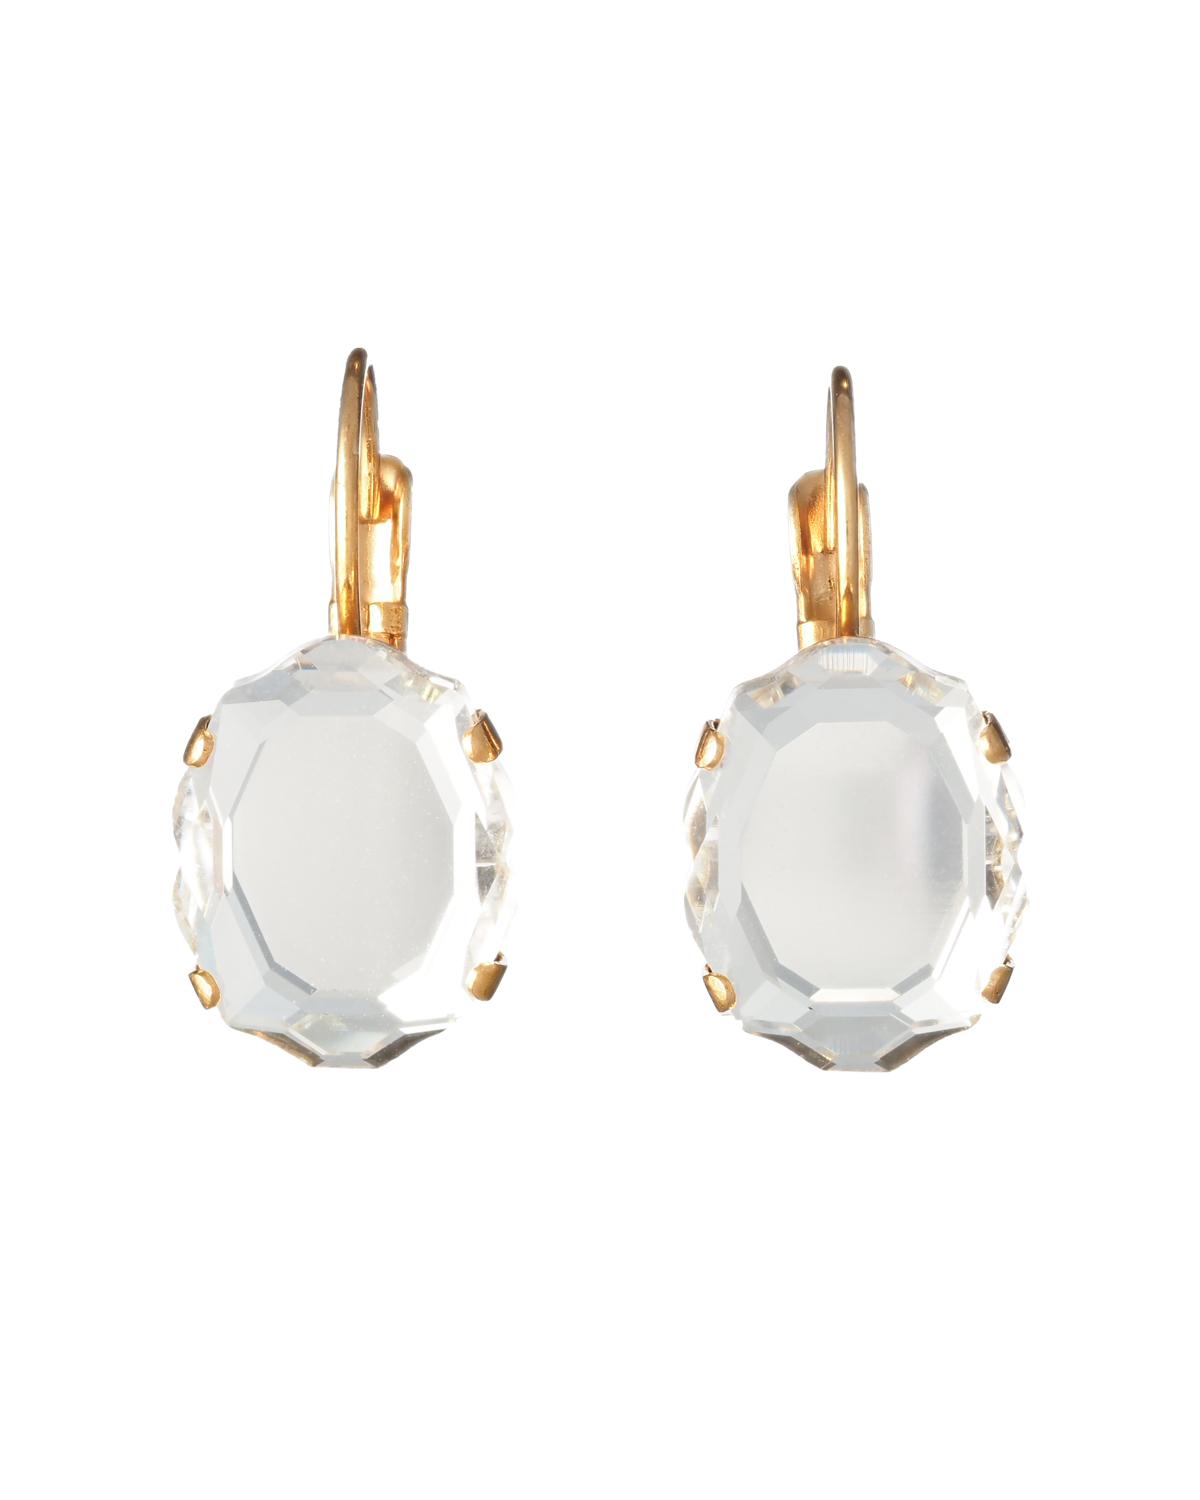 Crystal Baroque Mirror Earrings - Gold plated